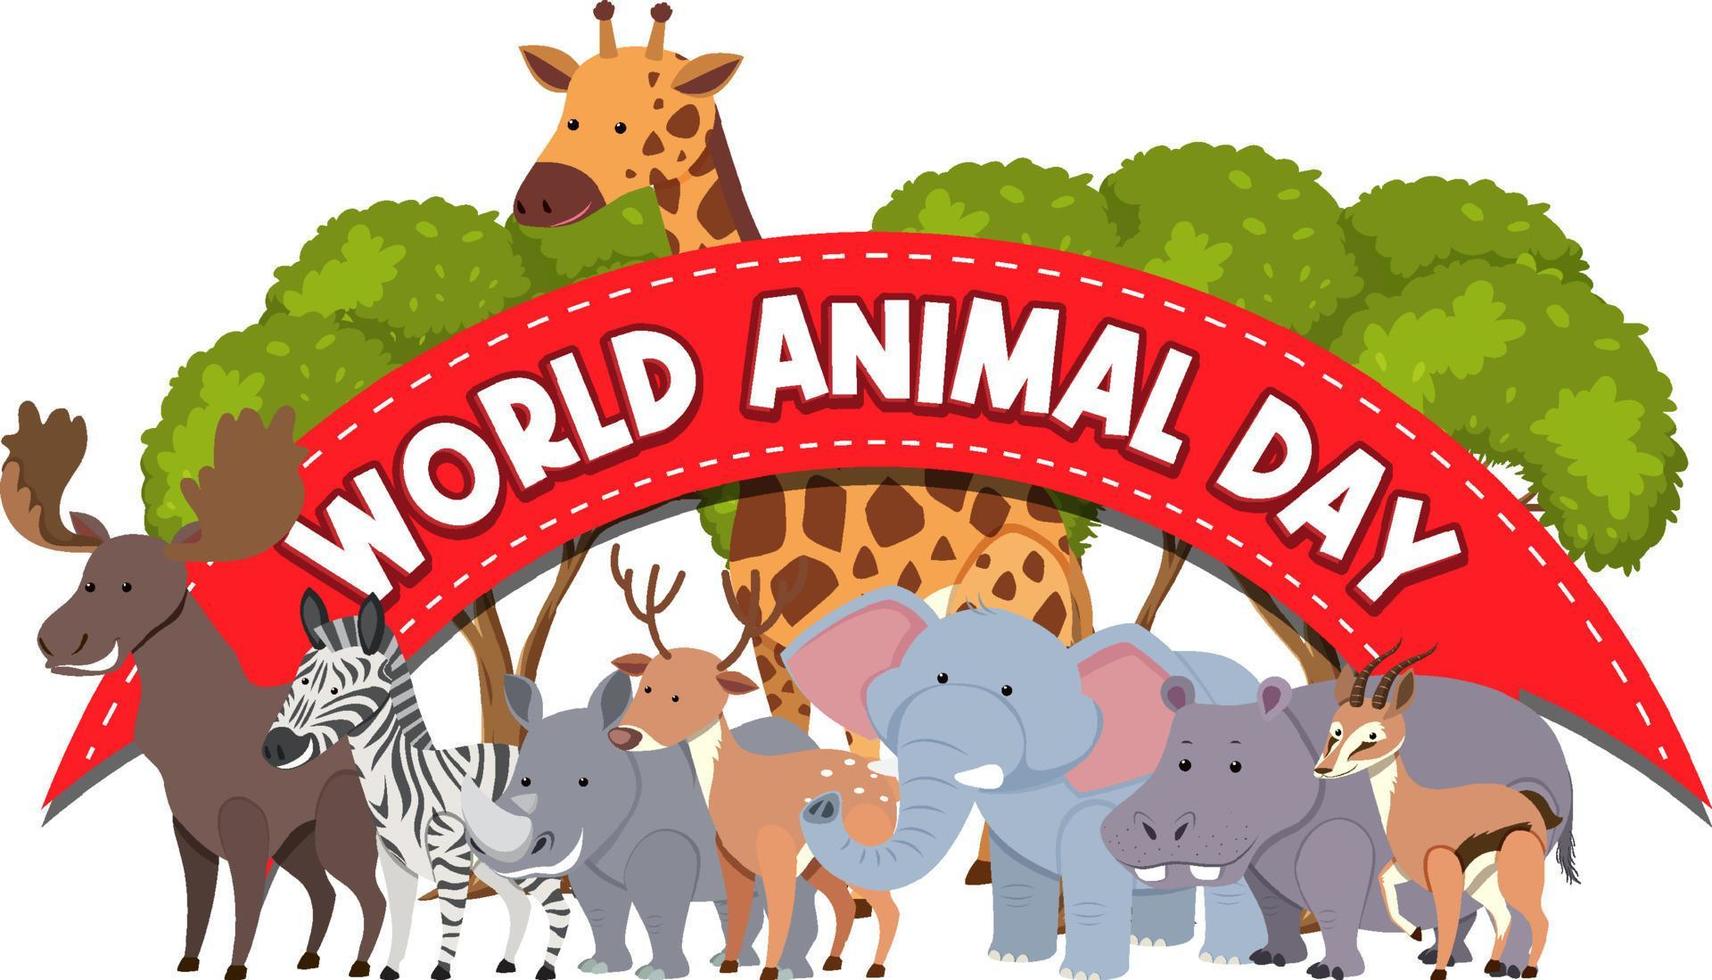 World Animal Day logo banner with african animals vector